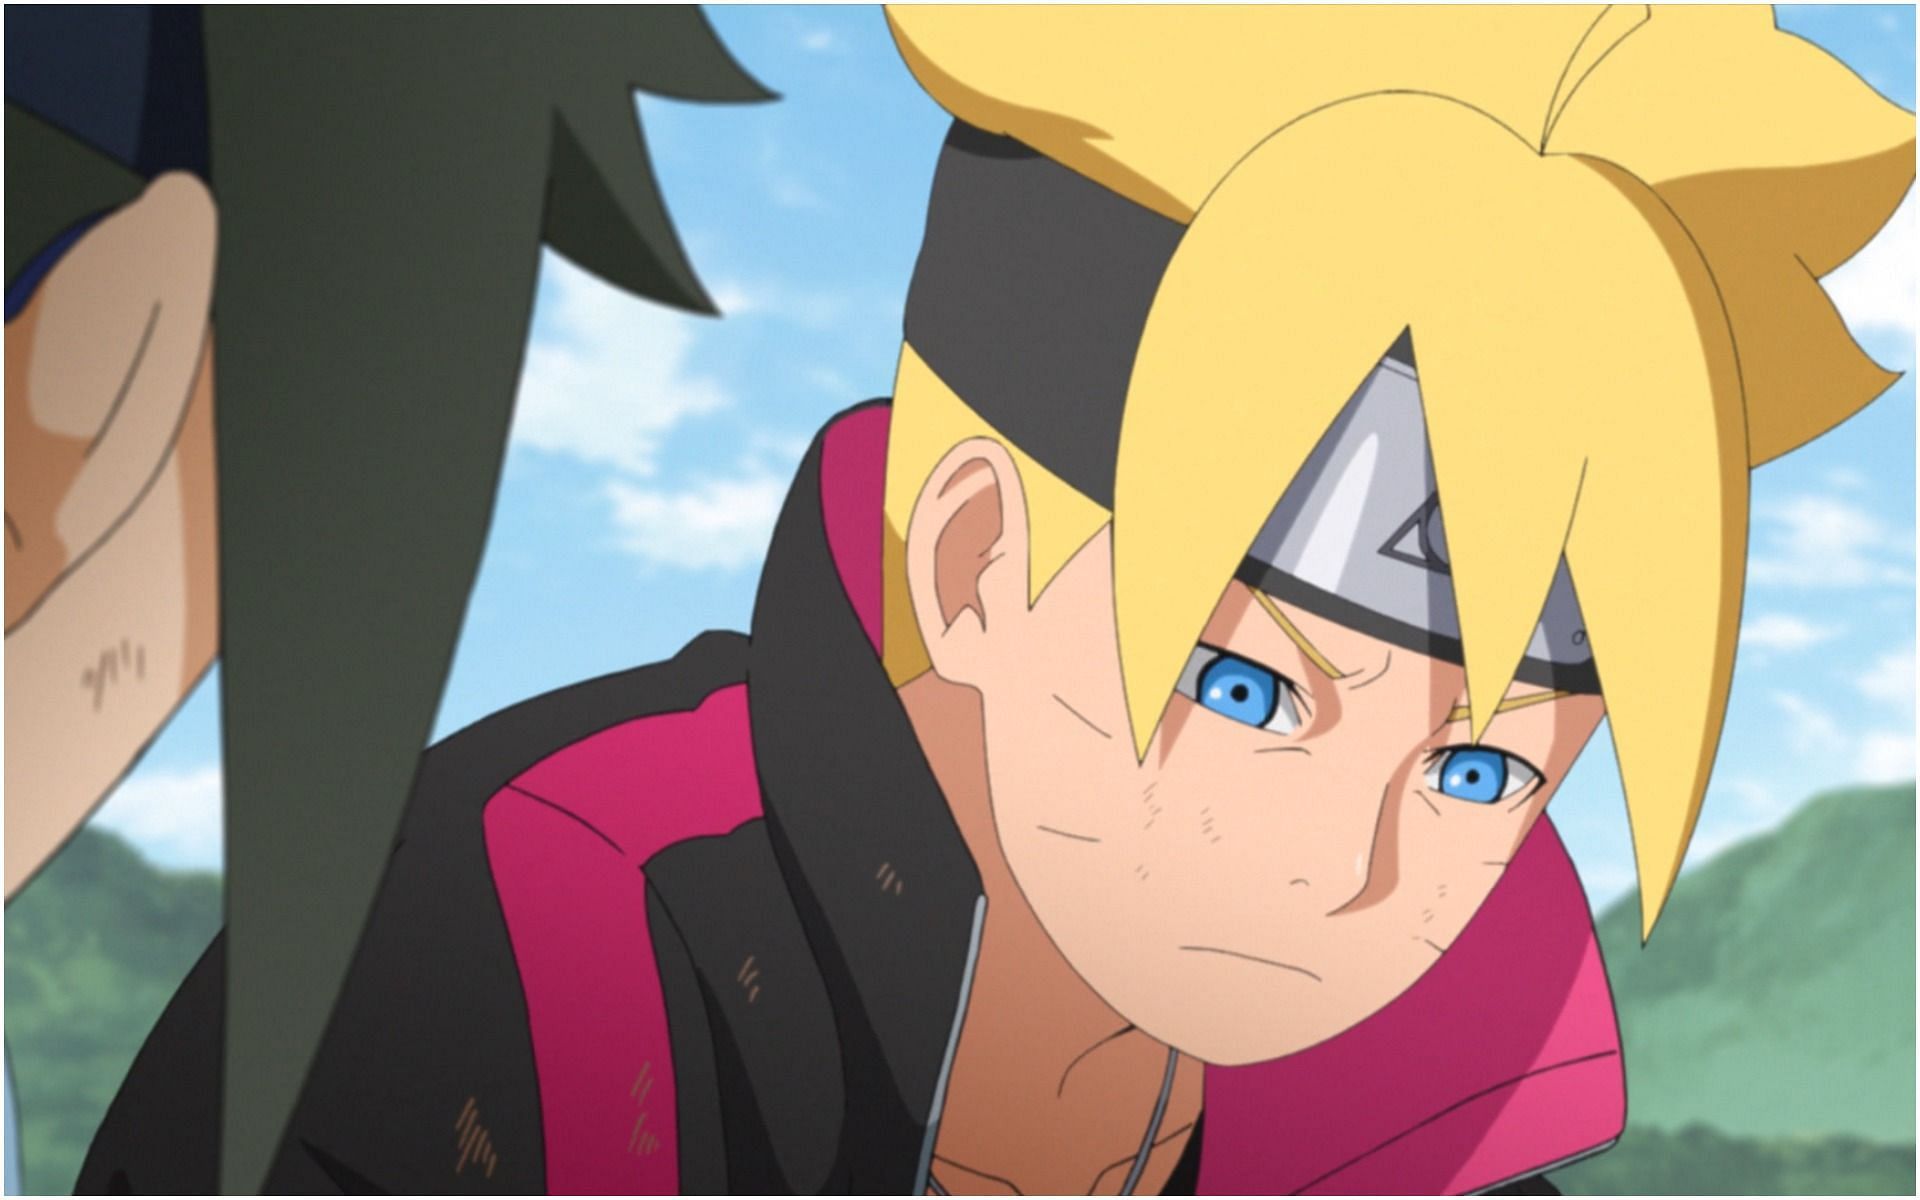 I see lately many people complain about Boruto and say it's not